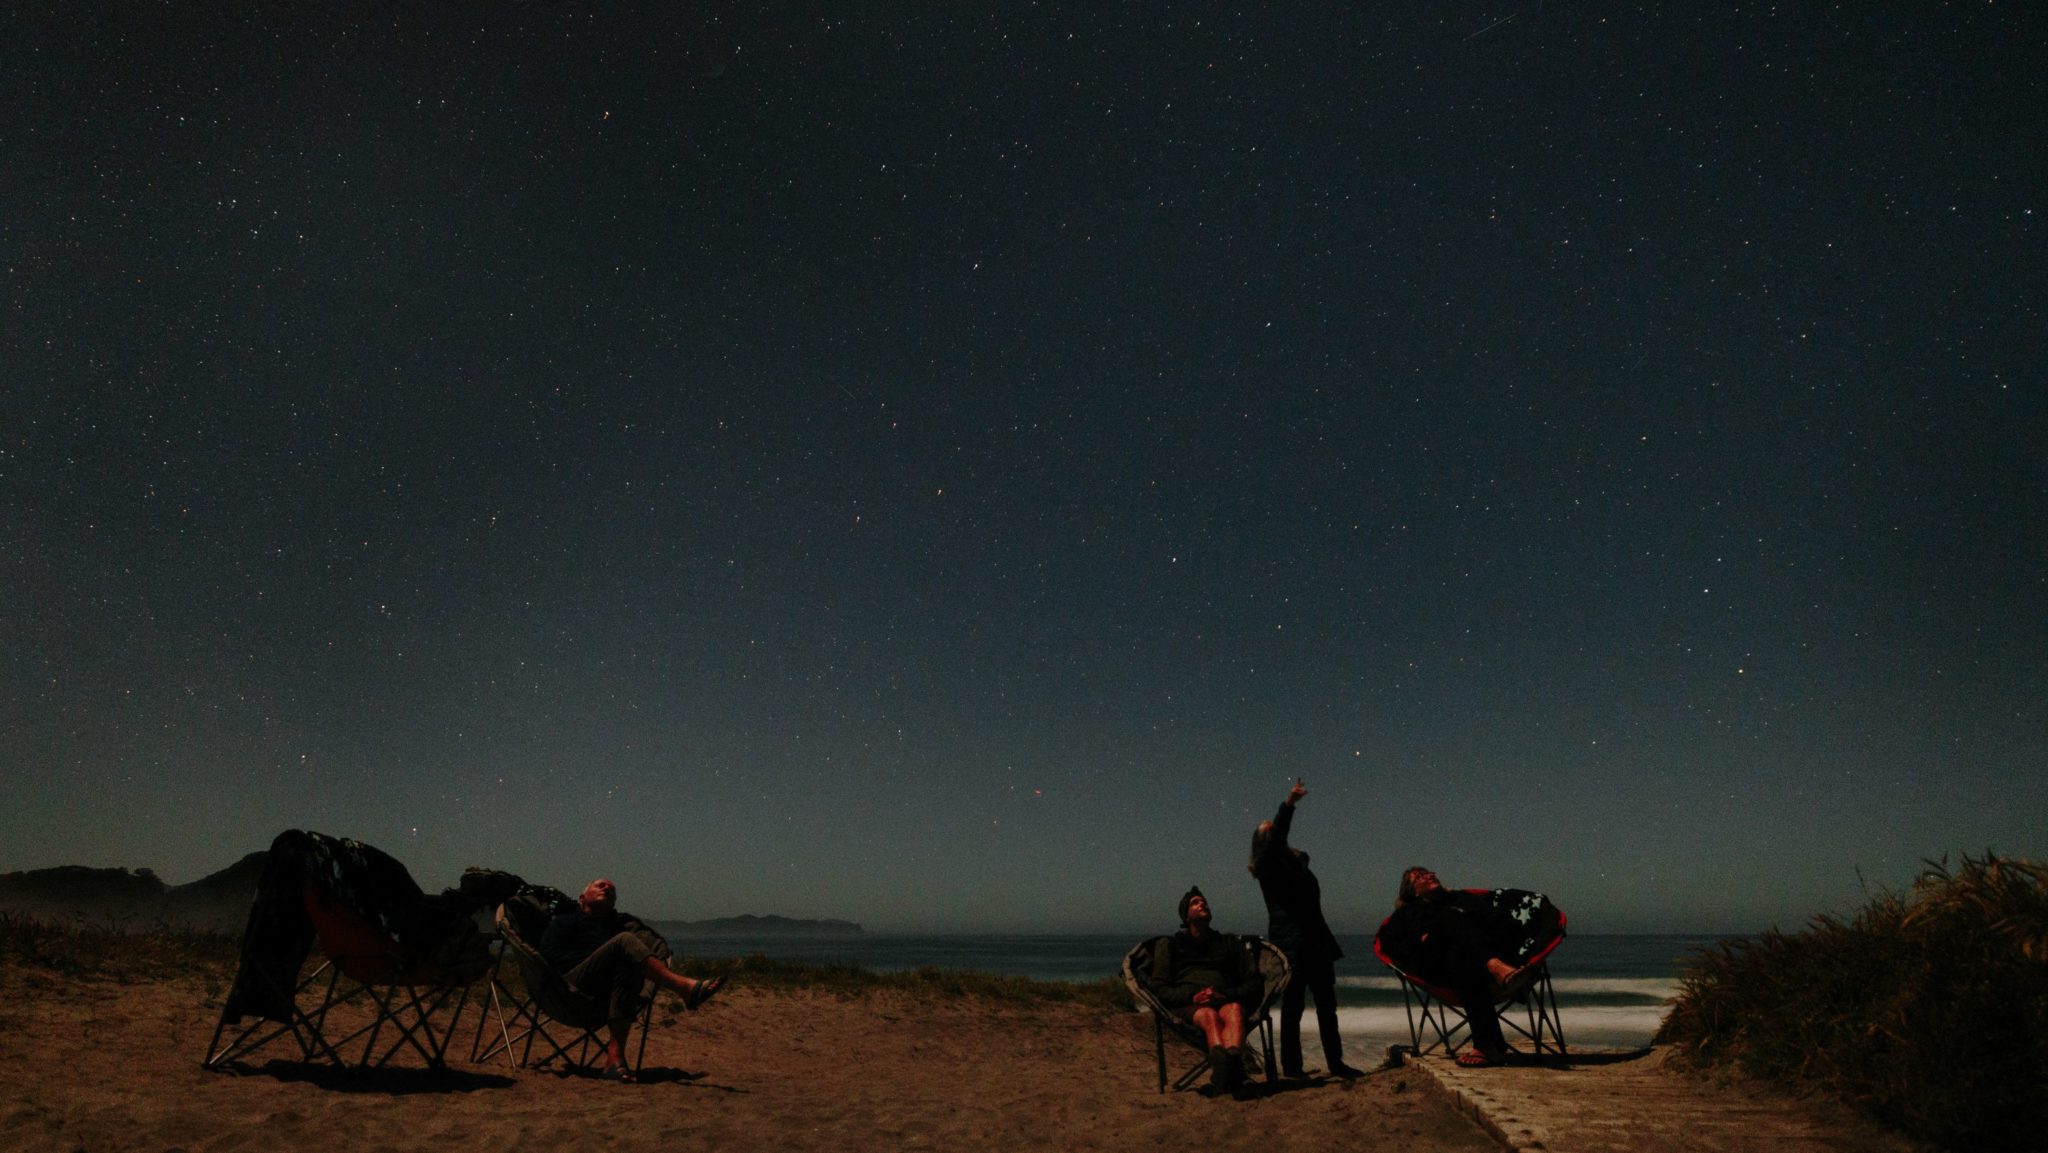 Stargazers admiring the starry night sky from the beach on New Zealand's Great Barrier Island.